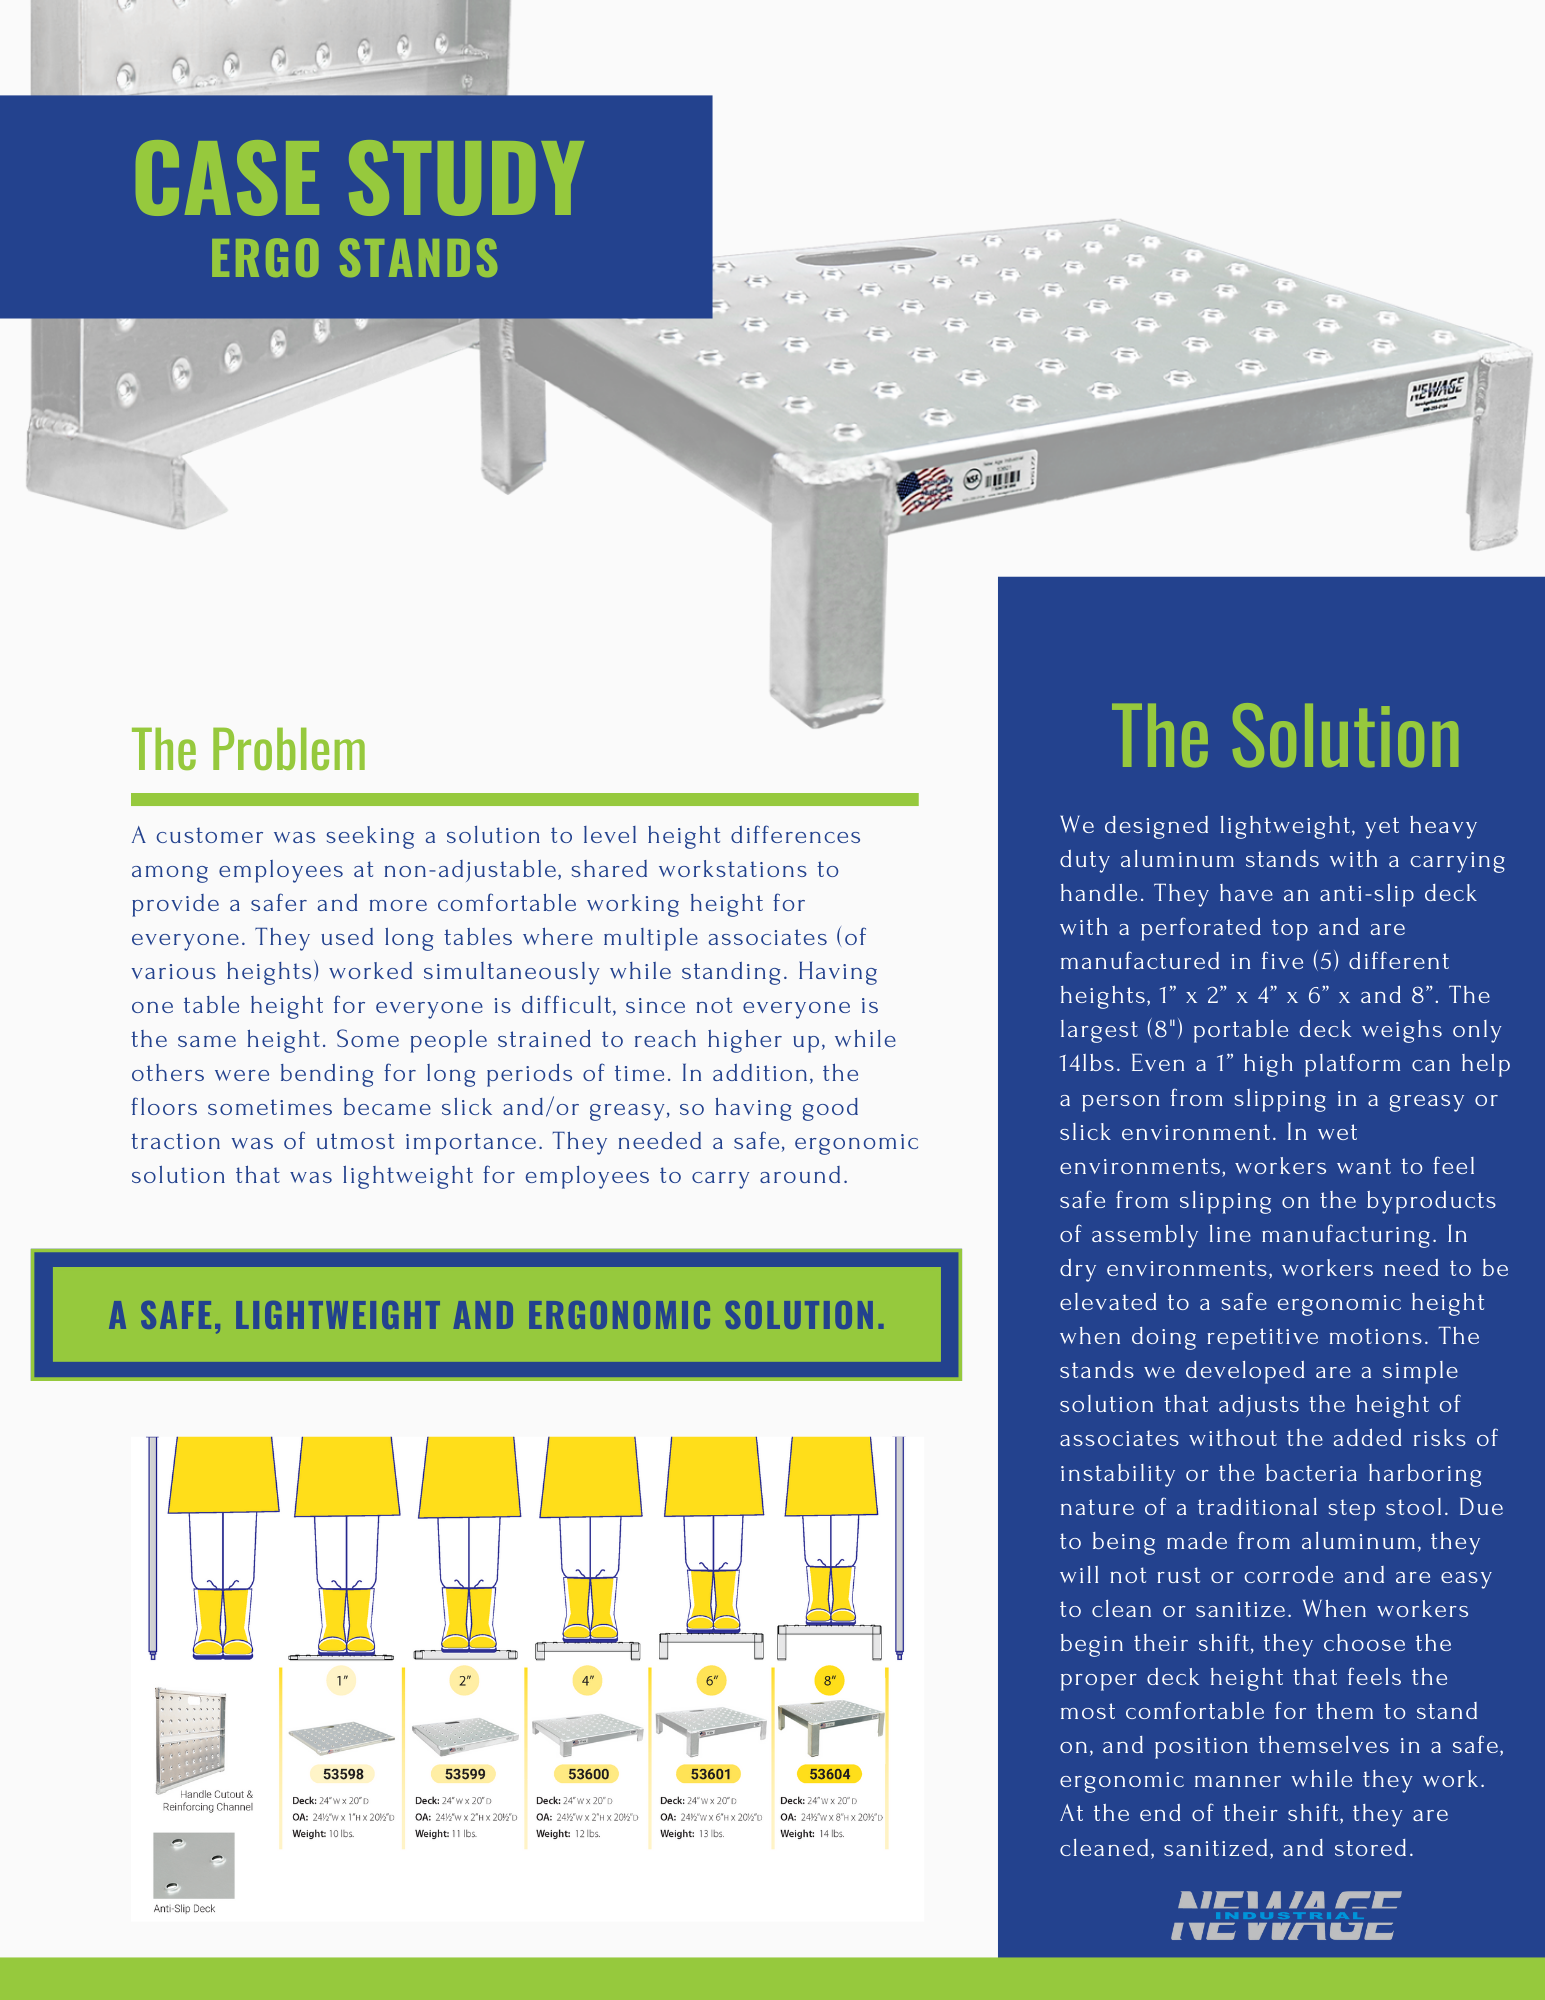 Check Out Our New Case Study To Learn About Ergo Stands